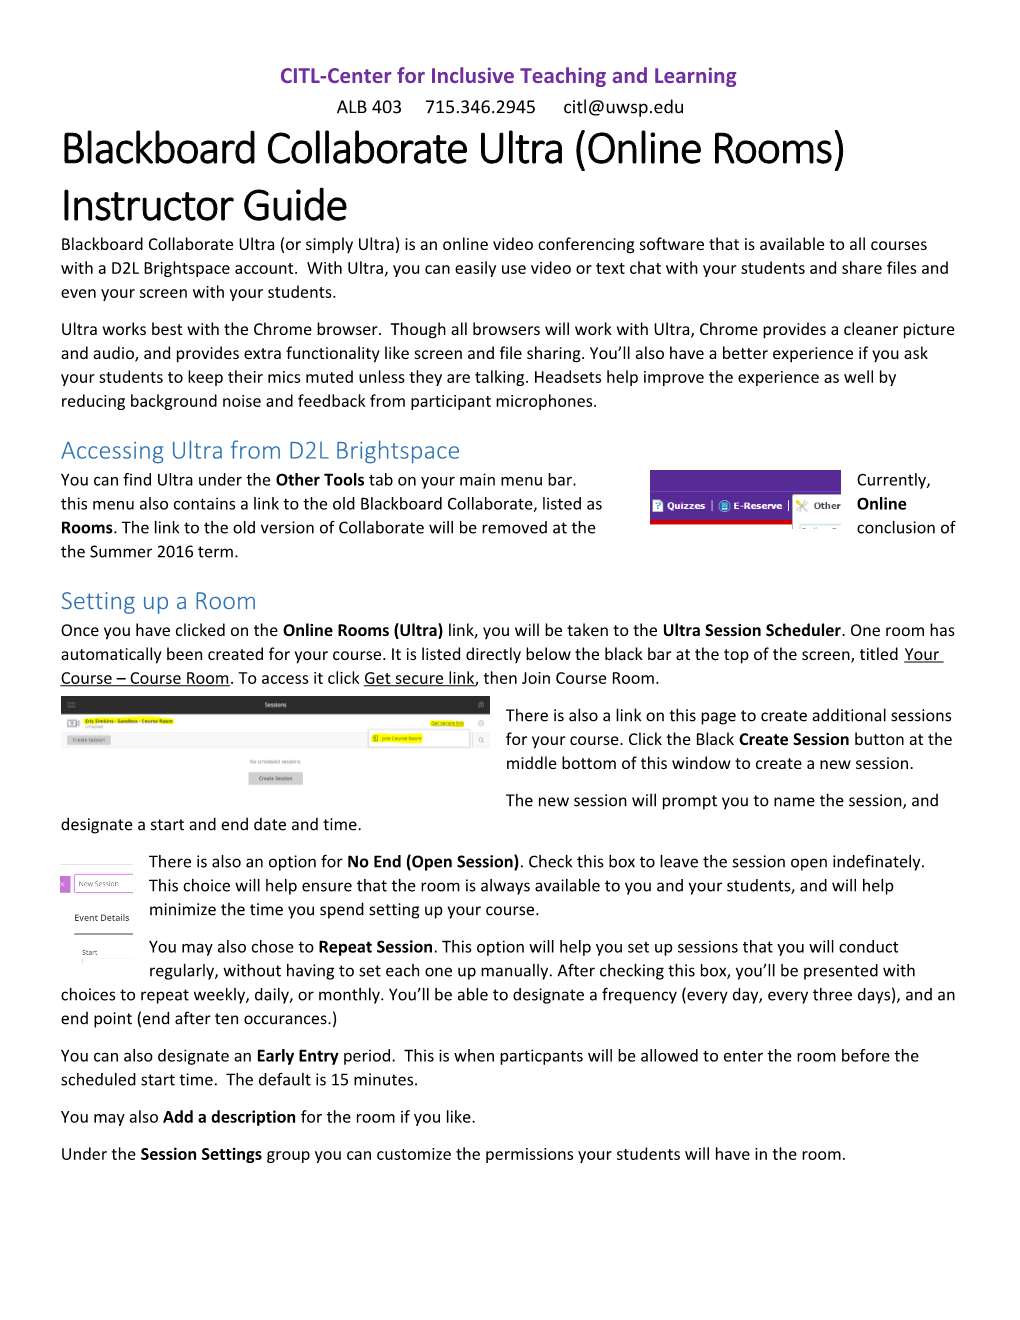 Blackboard Collaborate Ultra (Online Rooms) Instructor Guide